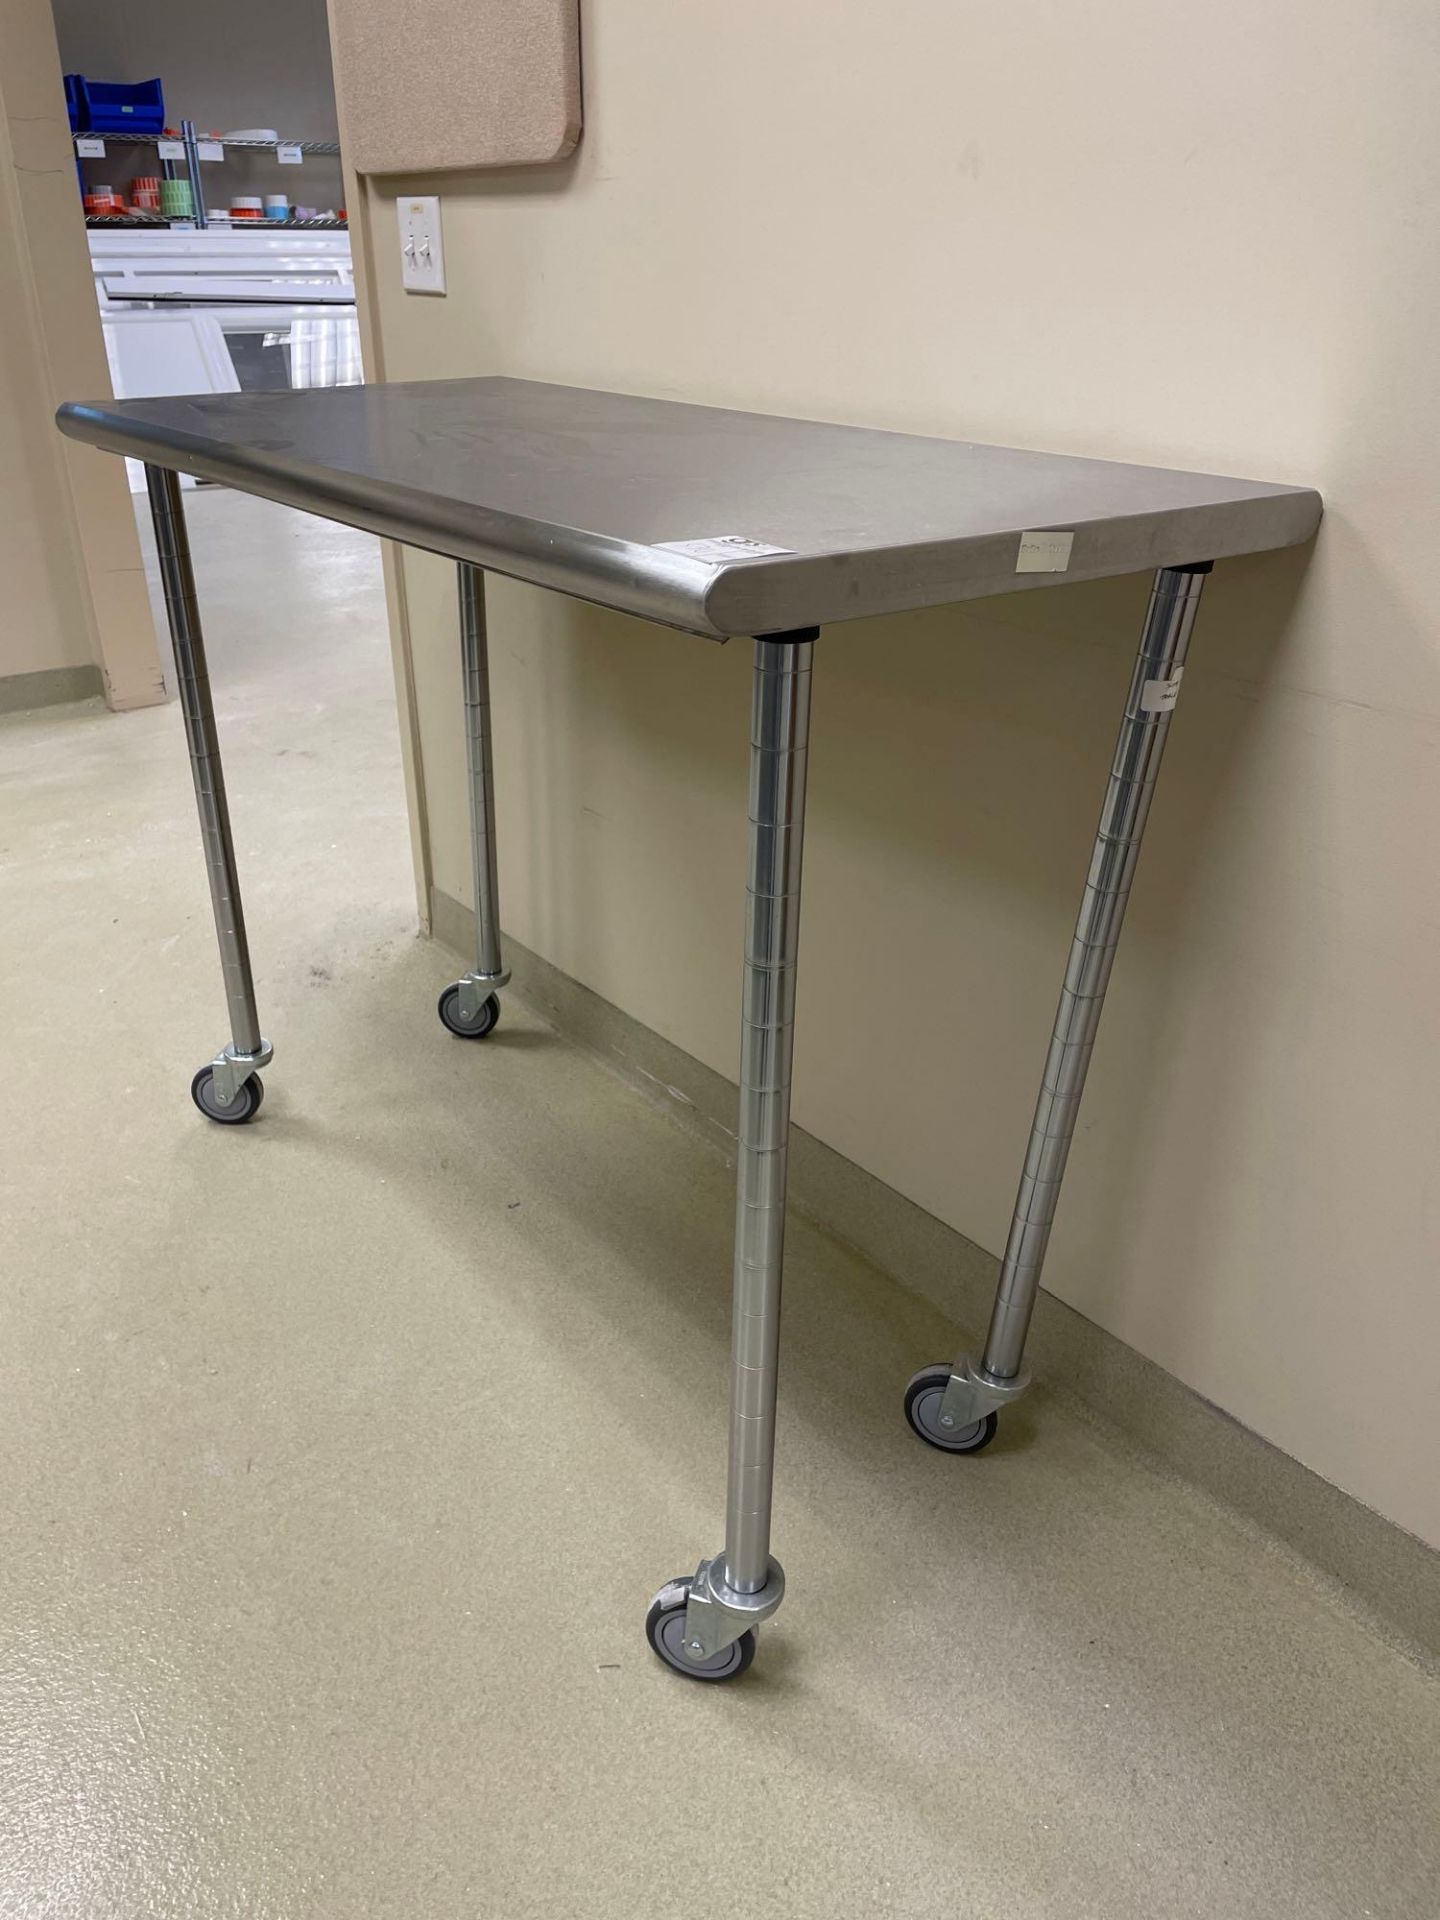 Stainless Top Table w/ Wire Shelf Legs on Casters - Image 3 of 3